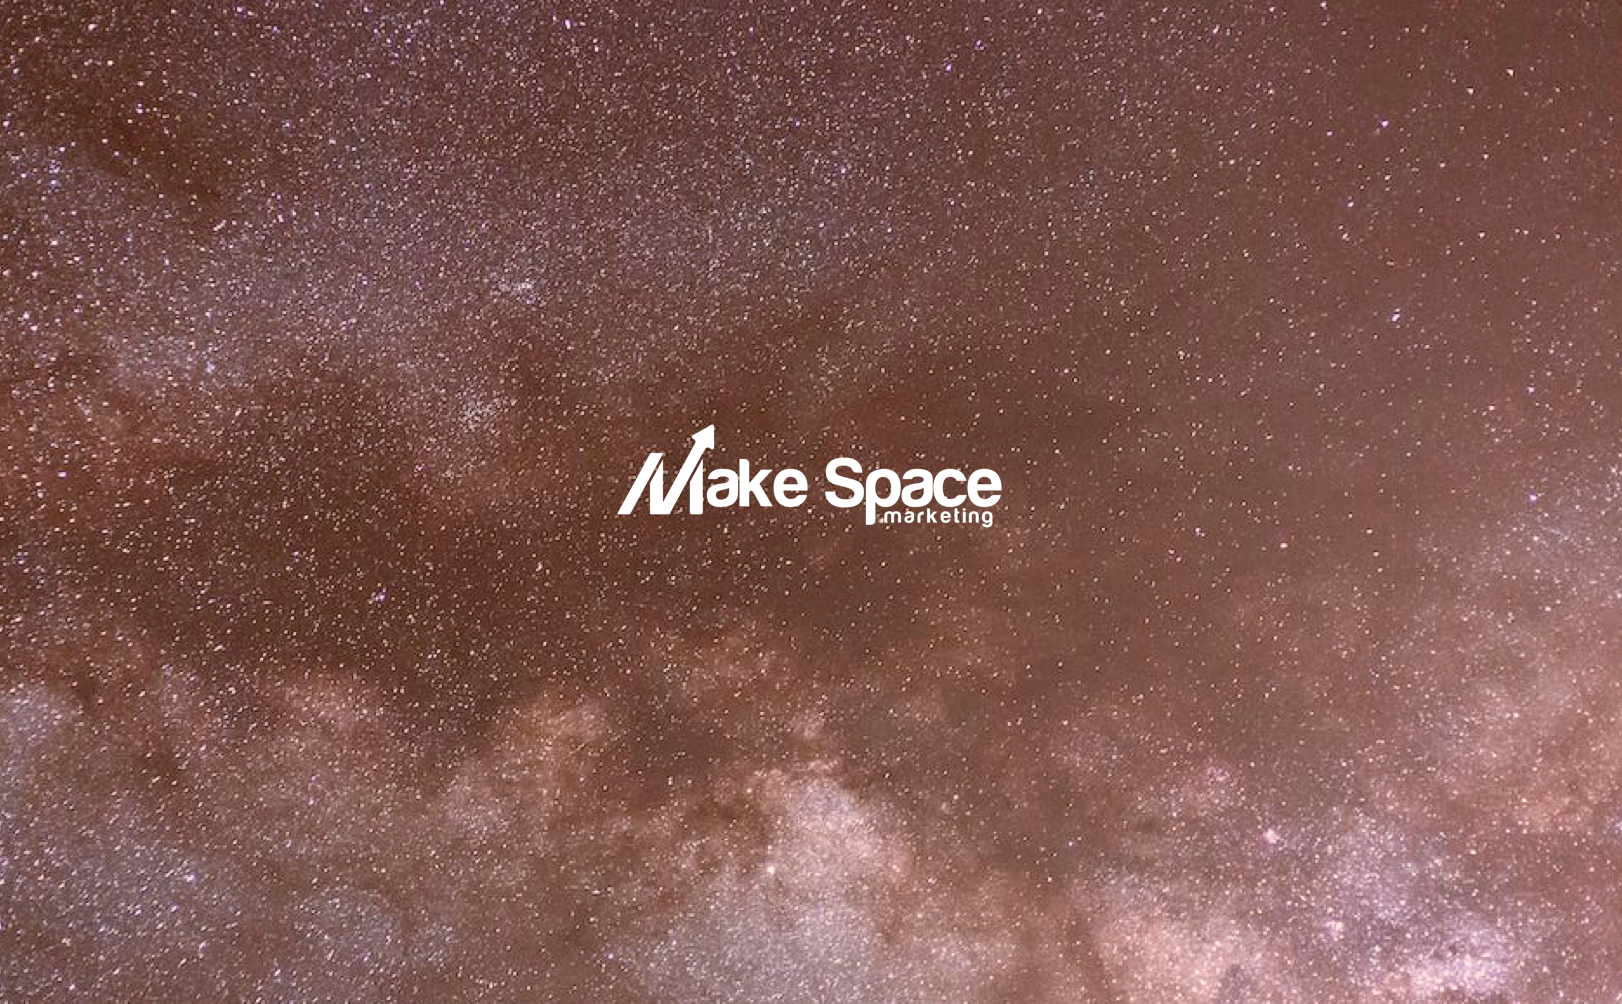 Make Space Marketing logo - visually appealing branding shown in space